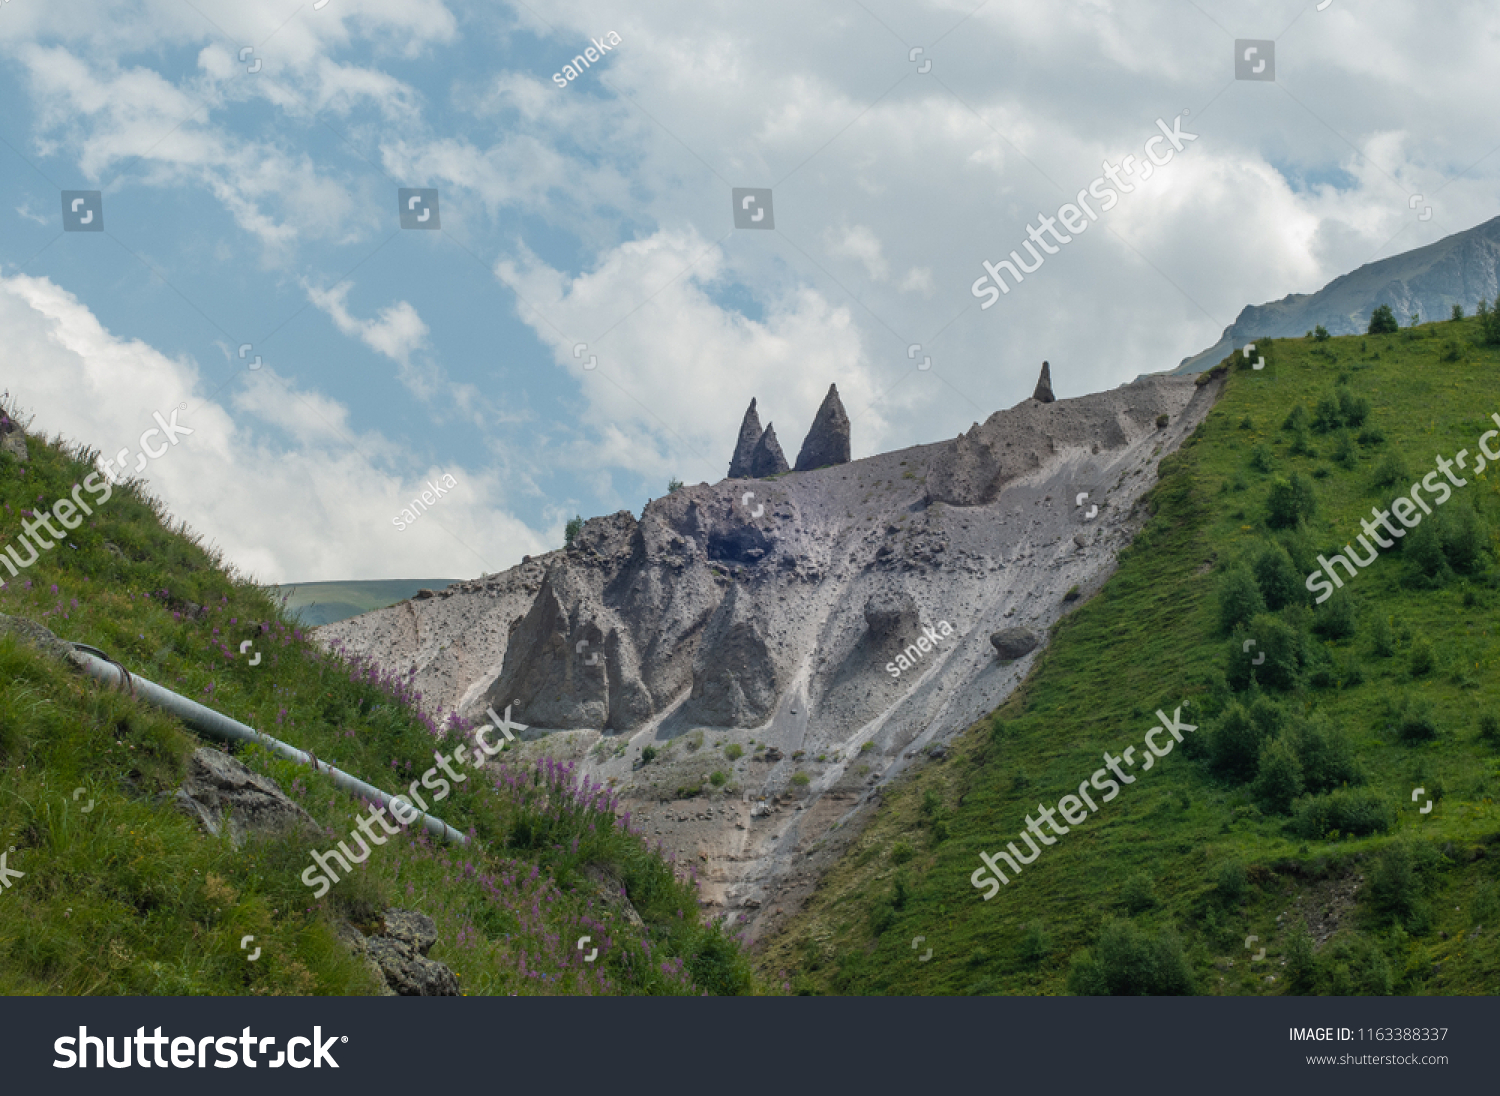 Mountains and cliffs of the North Caucasus, Teeth of the devil. The tract of Gily-Su, the Republic of Kabardino-Balkaria, Russia. #1163388337